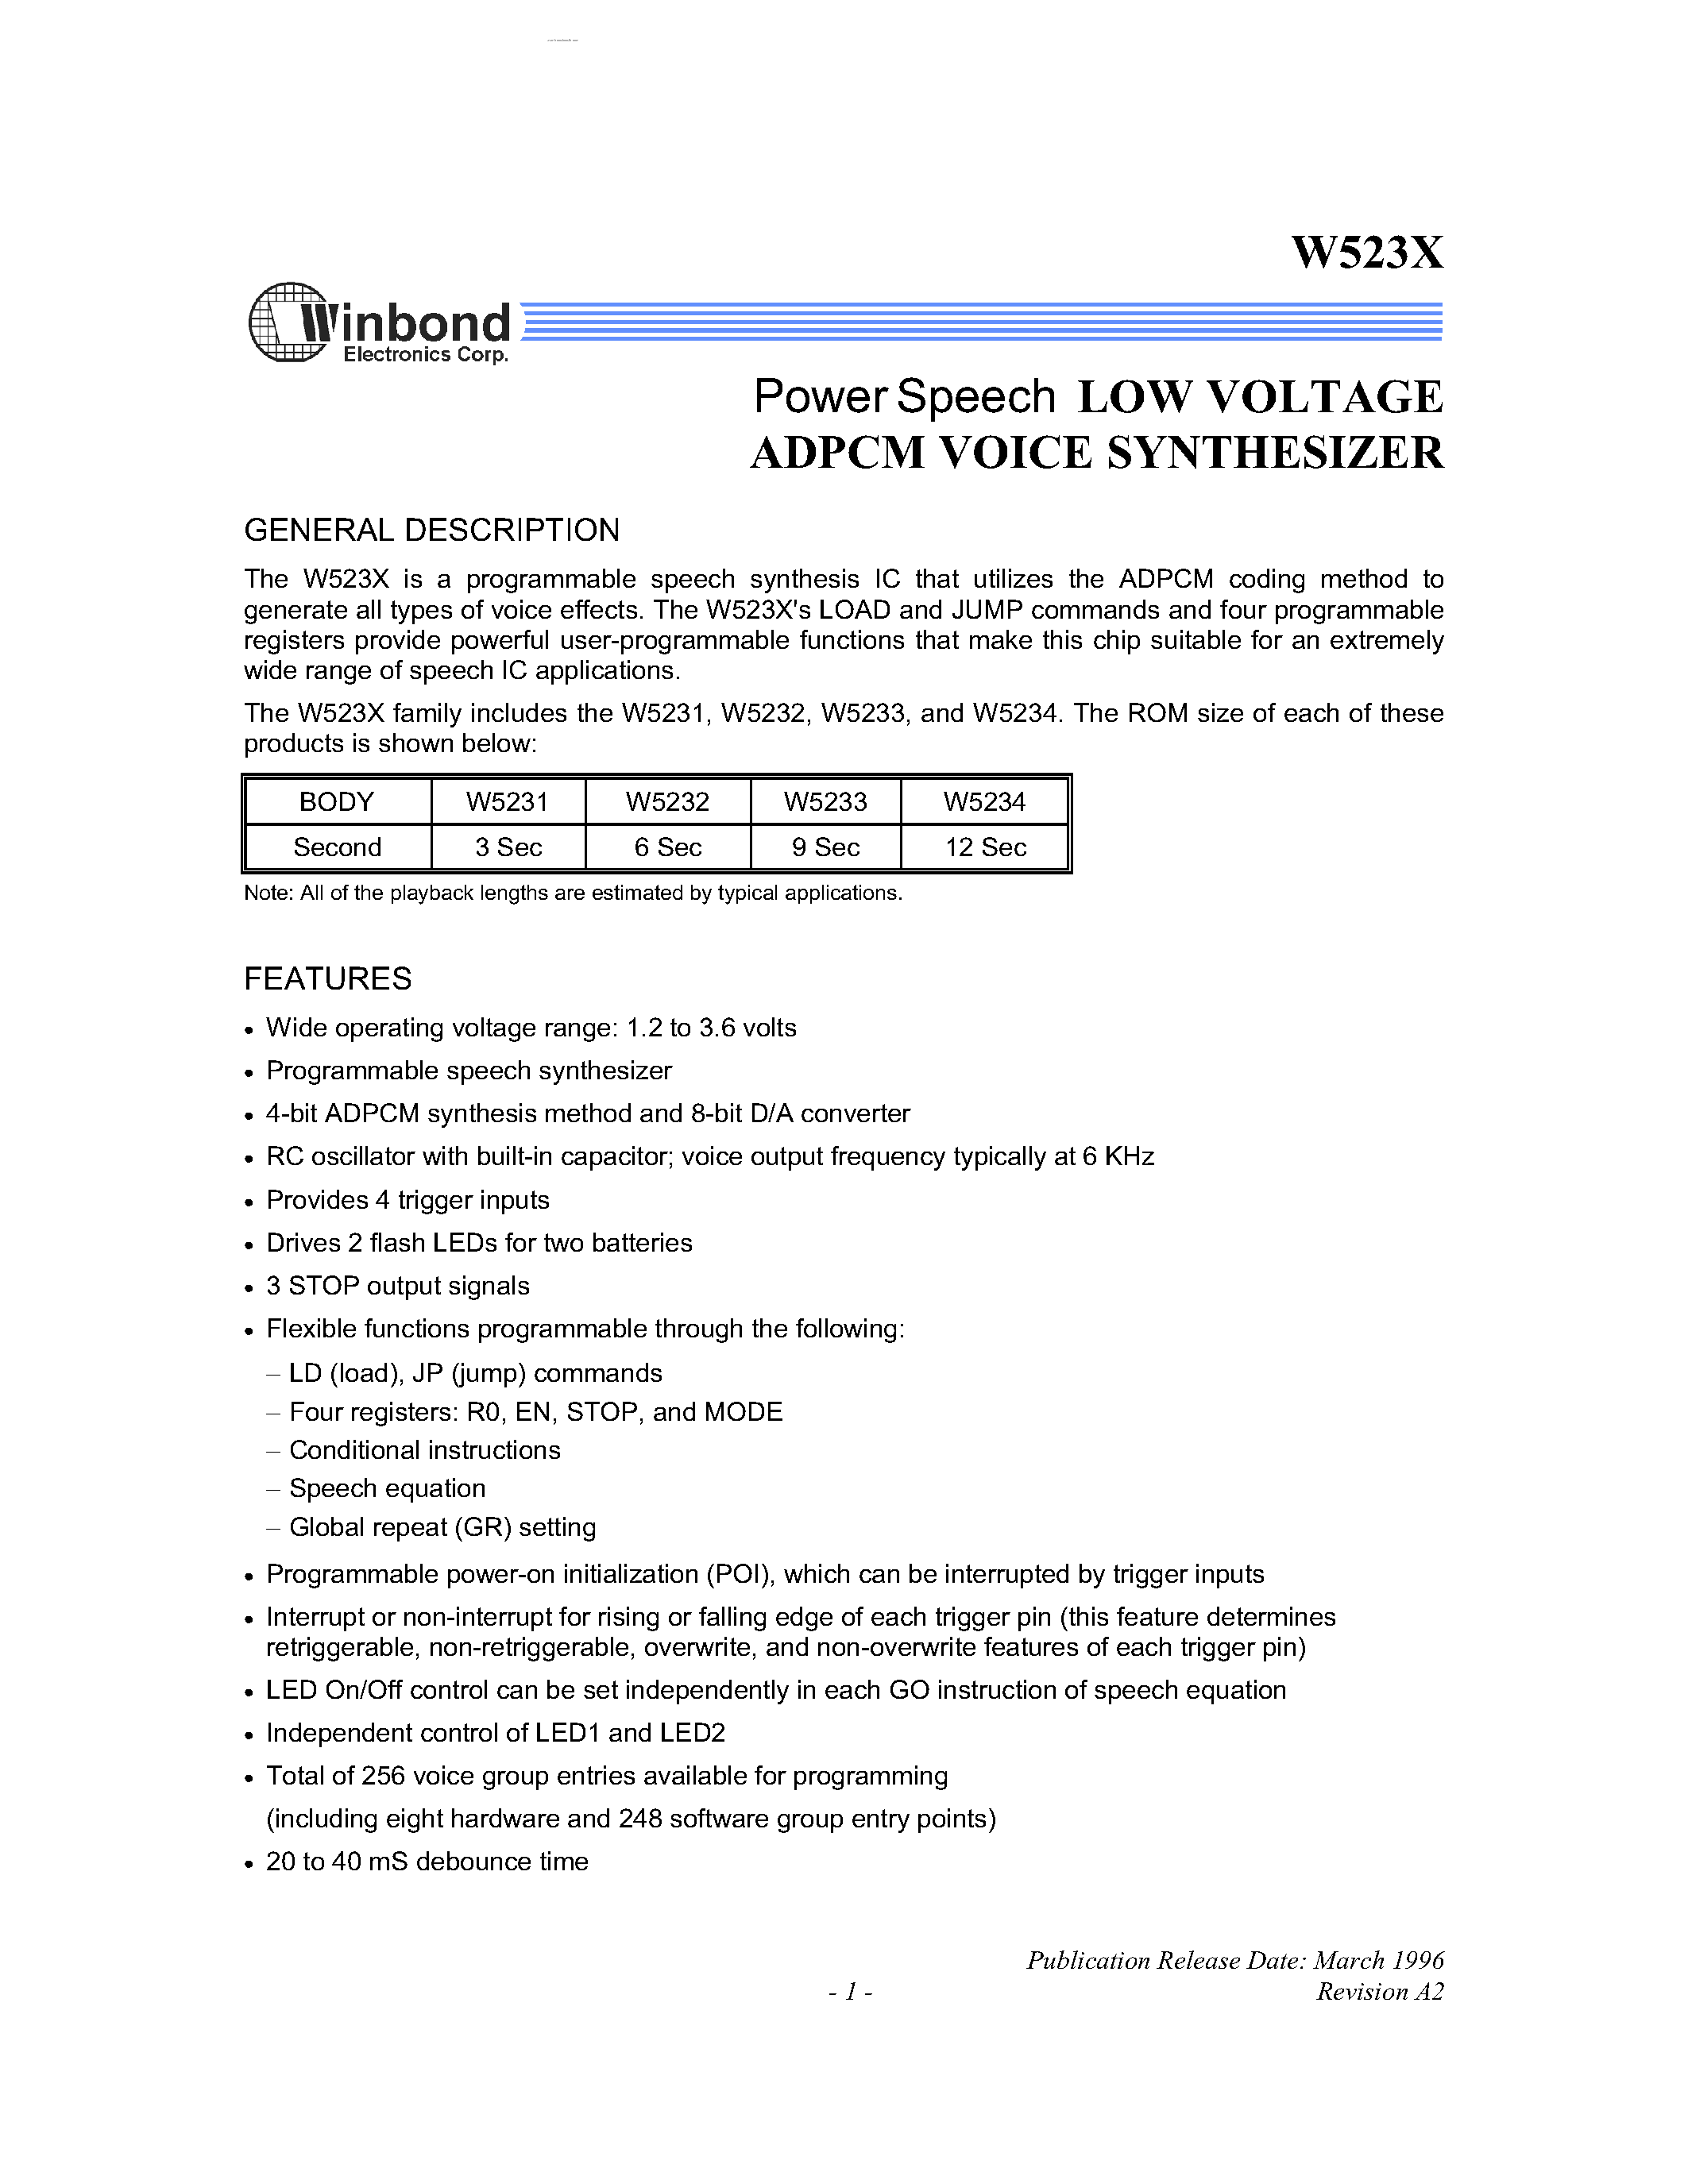 Datasheet W523x - Power Speech LOW VOLTAGE ADPCM VOICE SYNTHESIZER page 1